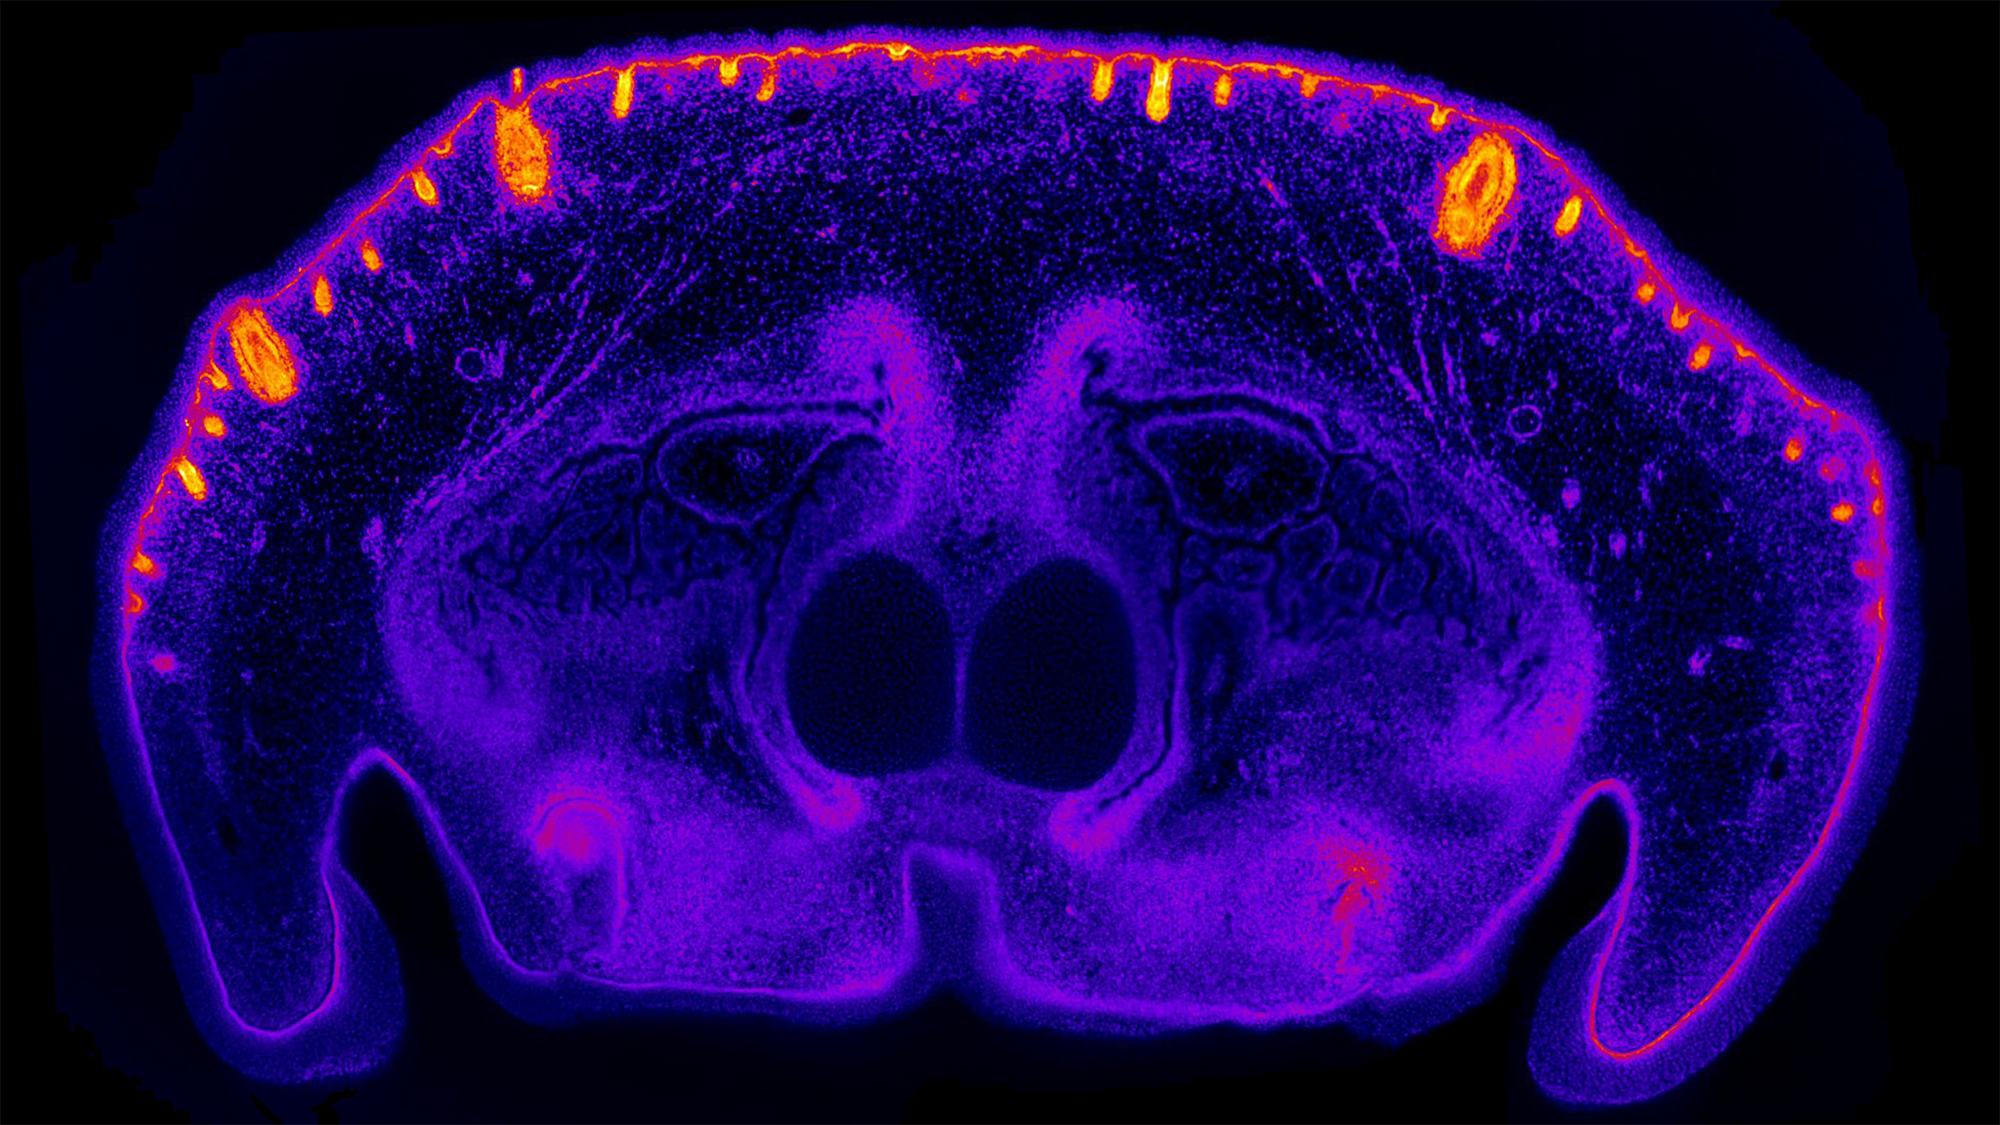 June 2022 - Dagenais - Lower jaw of a dog embryo - nuclear staining